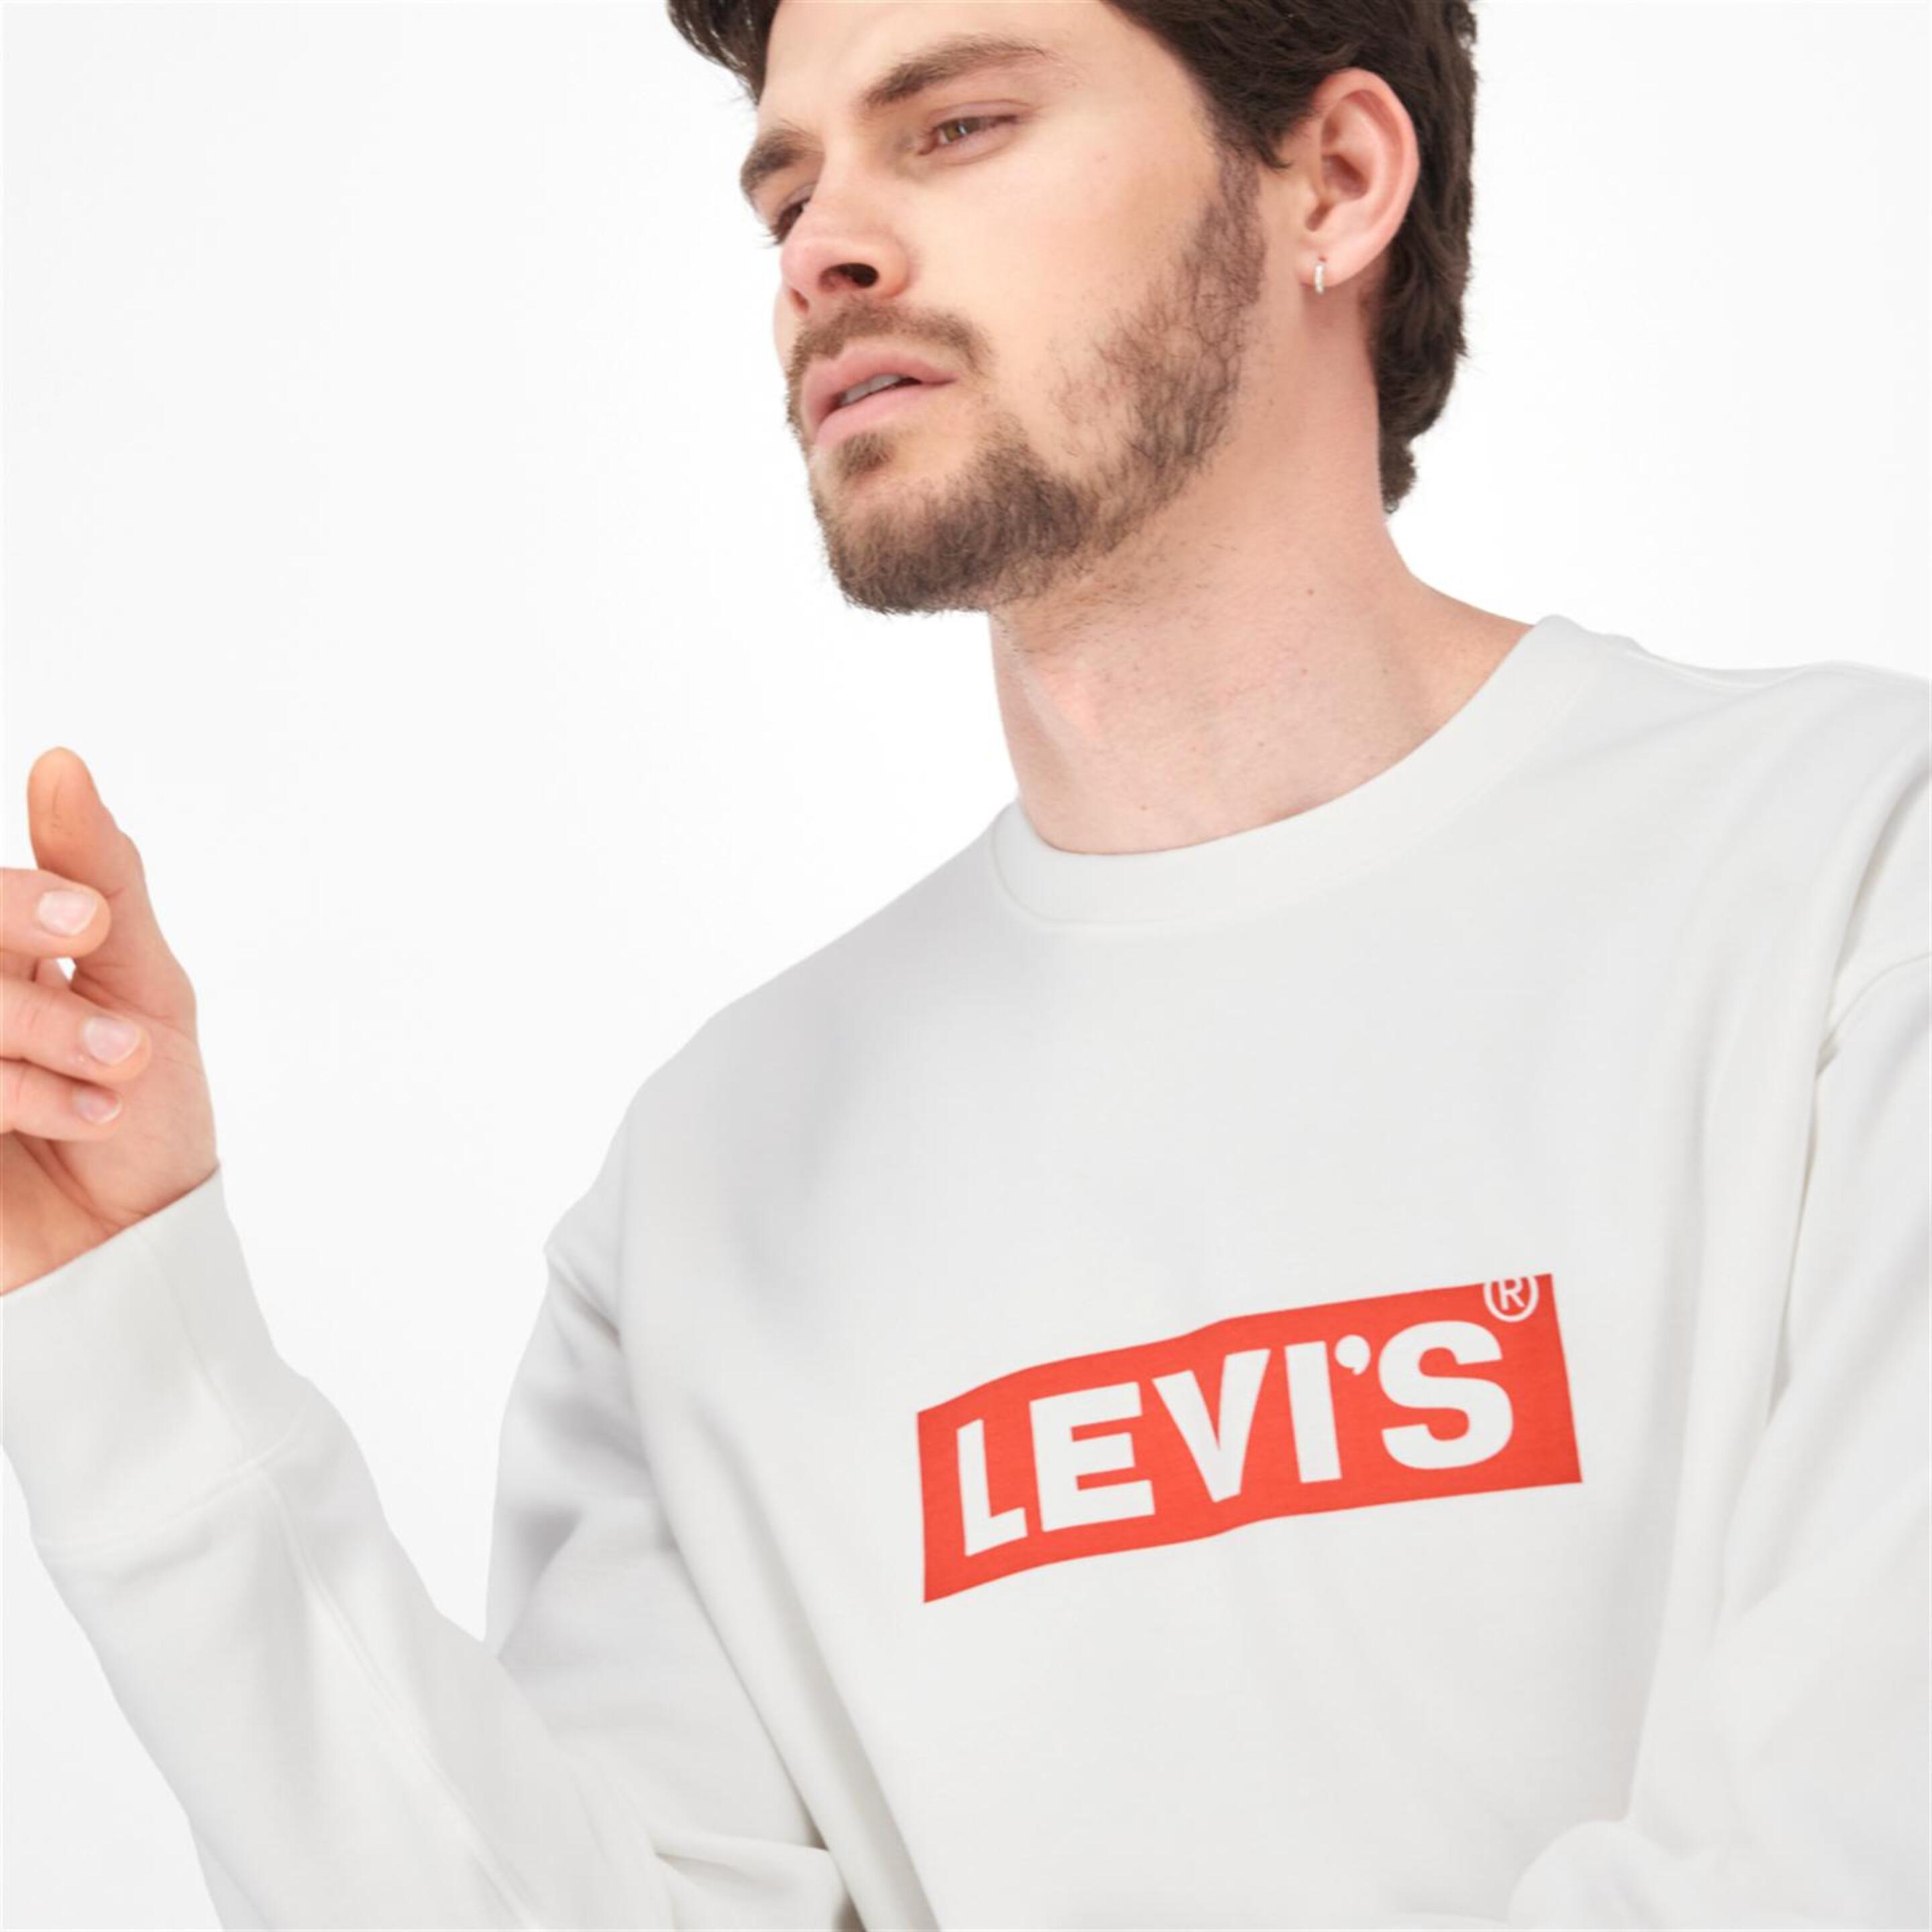 Levi's Red Tab